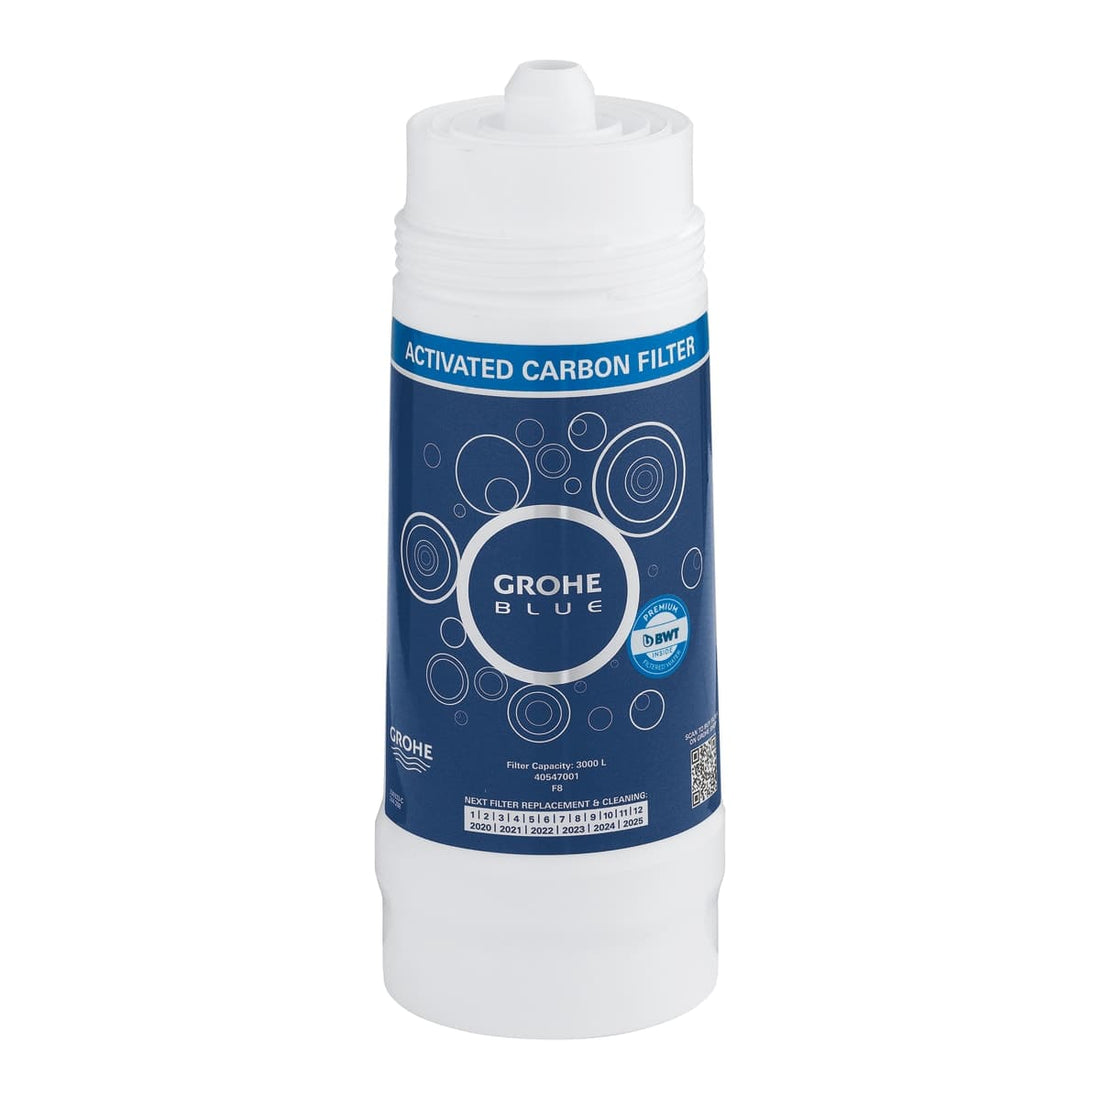 GROHE BLUE ACTIVE CARBON FILTER - (improves taste and smell) - best price from Maltashopper.com BR430007836